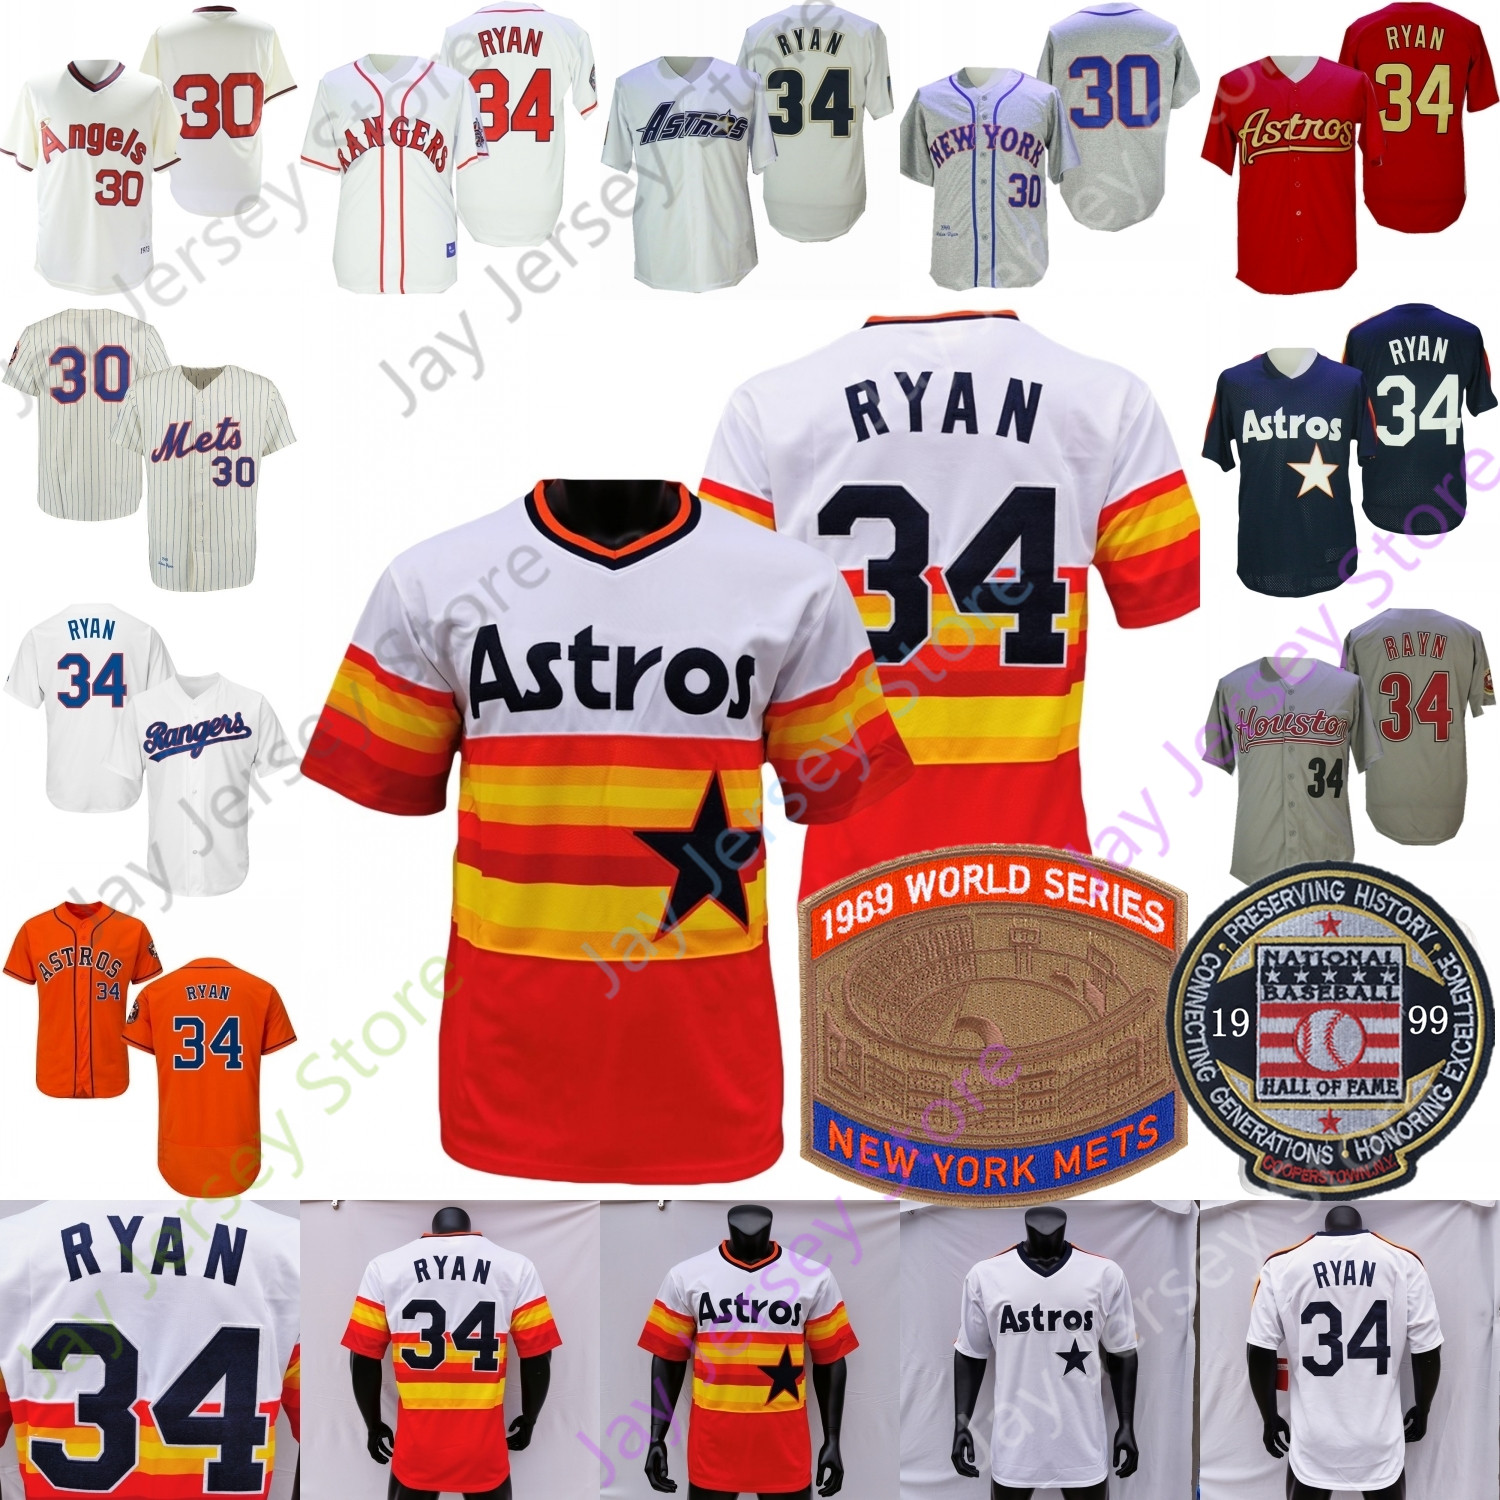 Nolan Ryan Jersey Rainbow Vintage 1969 WS 1994 1973 Gream Cooperstown Gray Gray Gray Back Navy Mesh BP 1999 Hall of Fame Patch Tamaño S-3XL